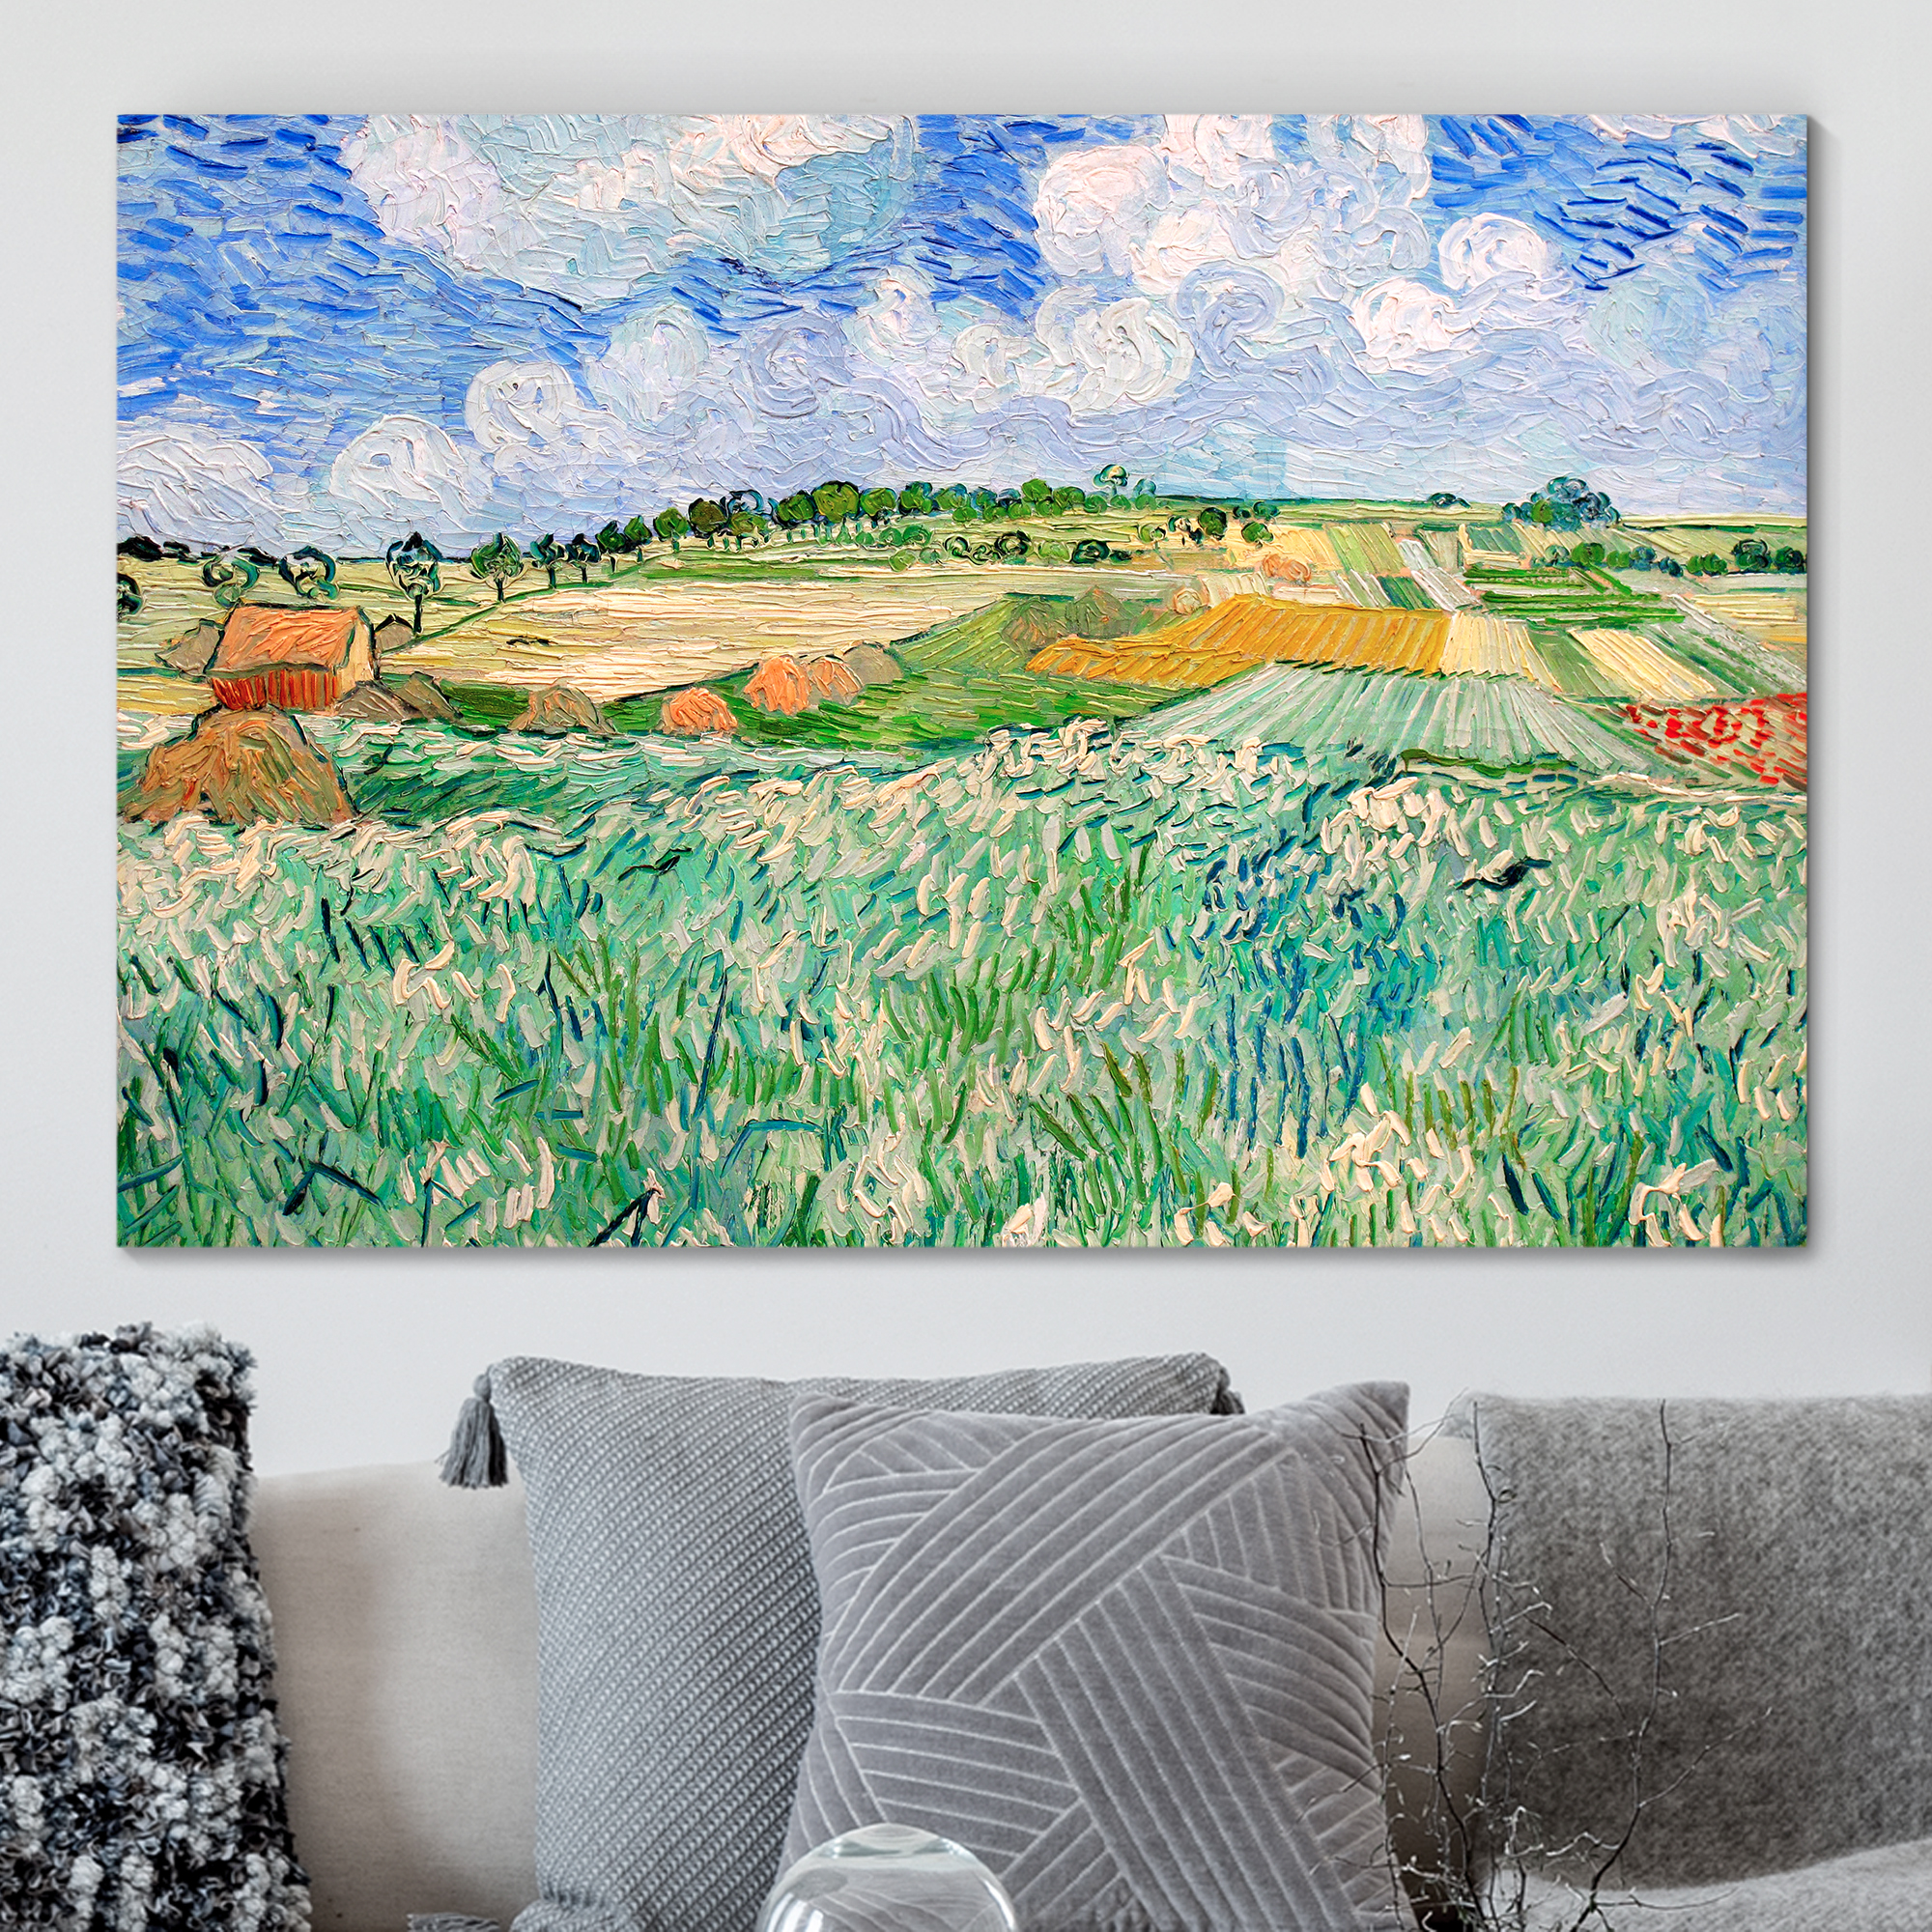 Plain near Auvers by Vincent Van Gogh - Oil Painting Reproduction on Canvas Prints Wall Art, Ready to Hang - 24